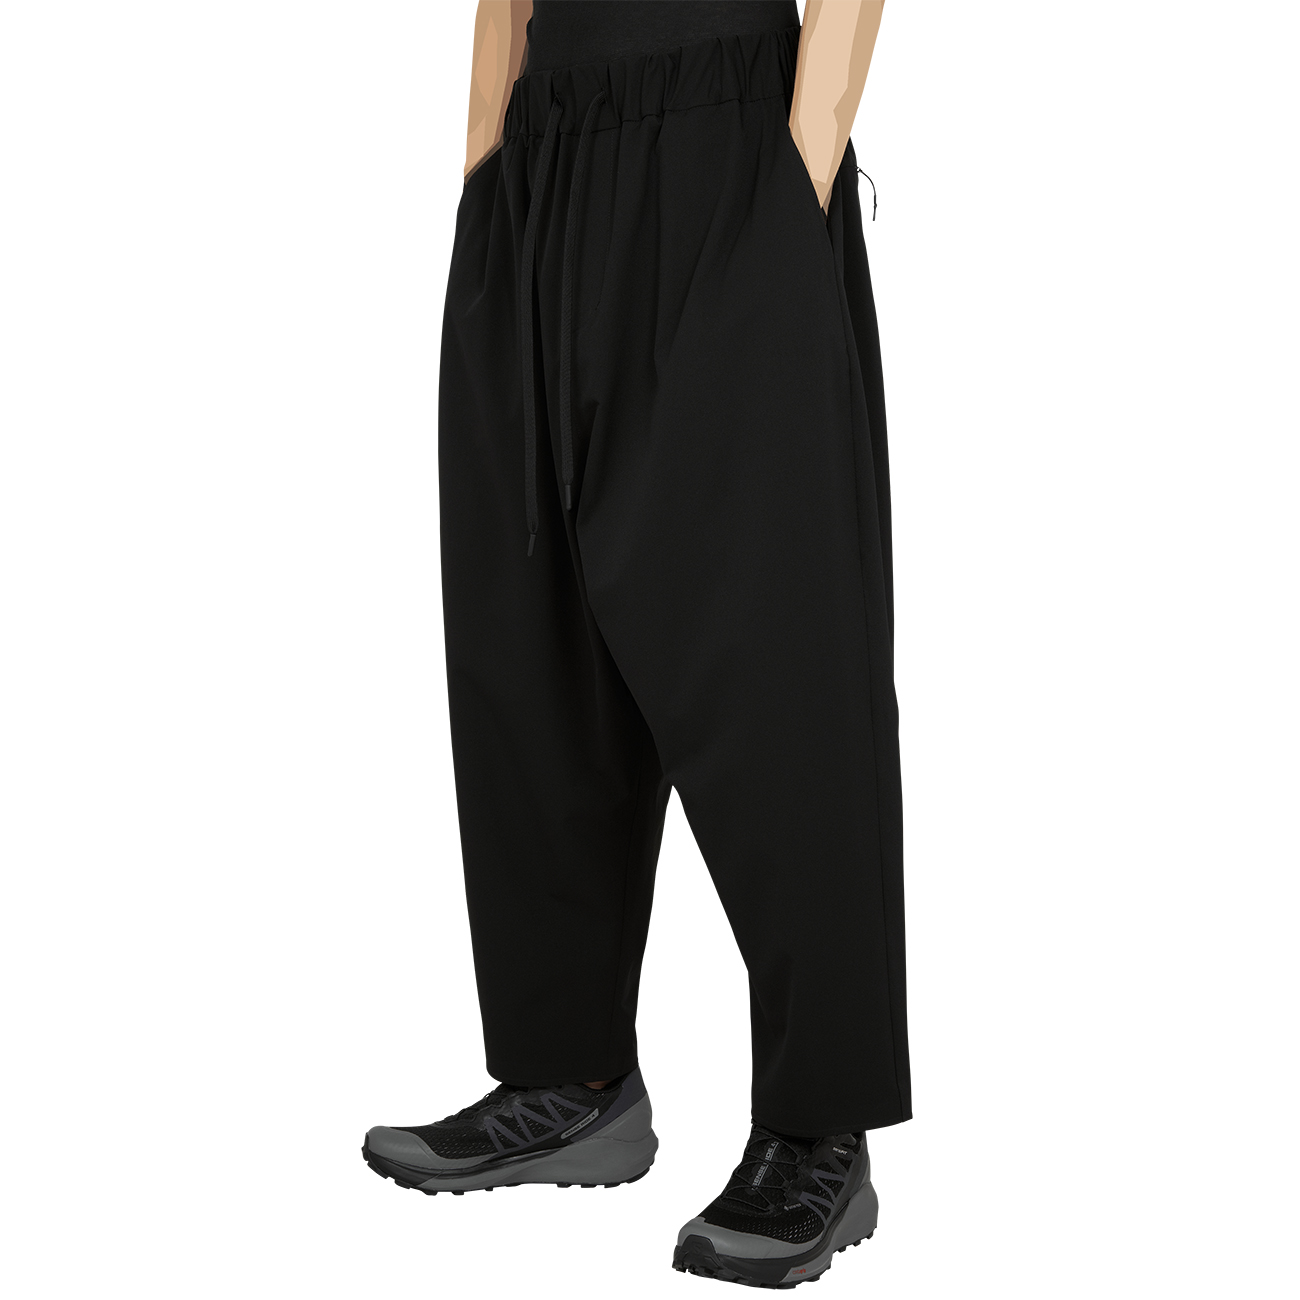 WHITE MOUNTAINEERING BLK (ホワイトマウンテニアリング ビーエルケー) - 22AW STRETCHED SARROUEL PANTS BLACKの詳細画像1